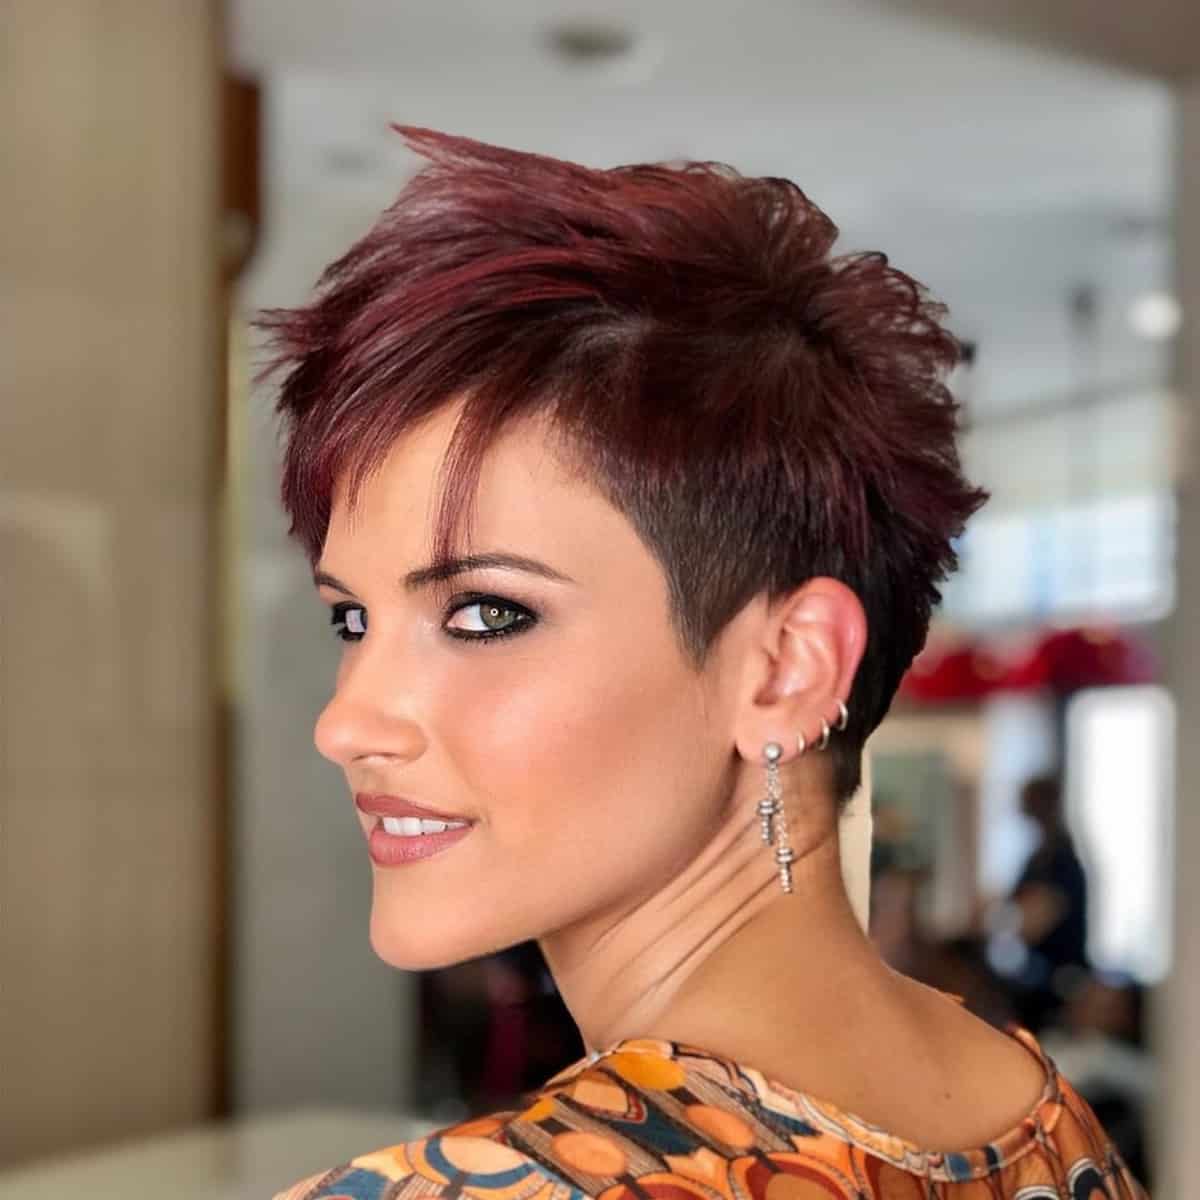 Textured Long Top Pixie with the Short Shaved Side and a Fringe